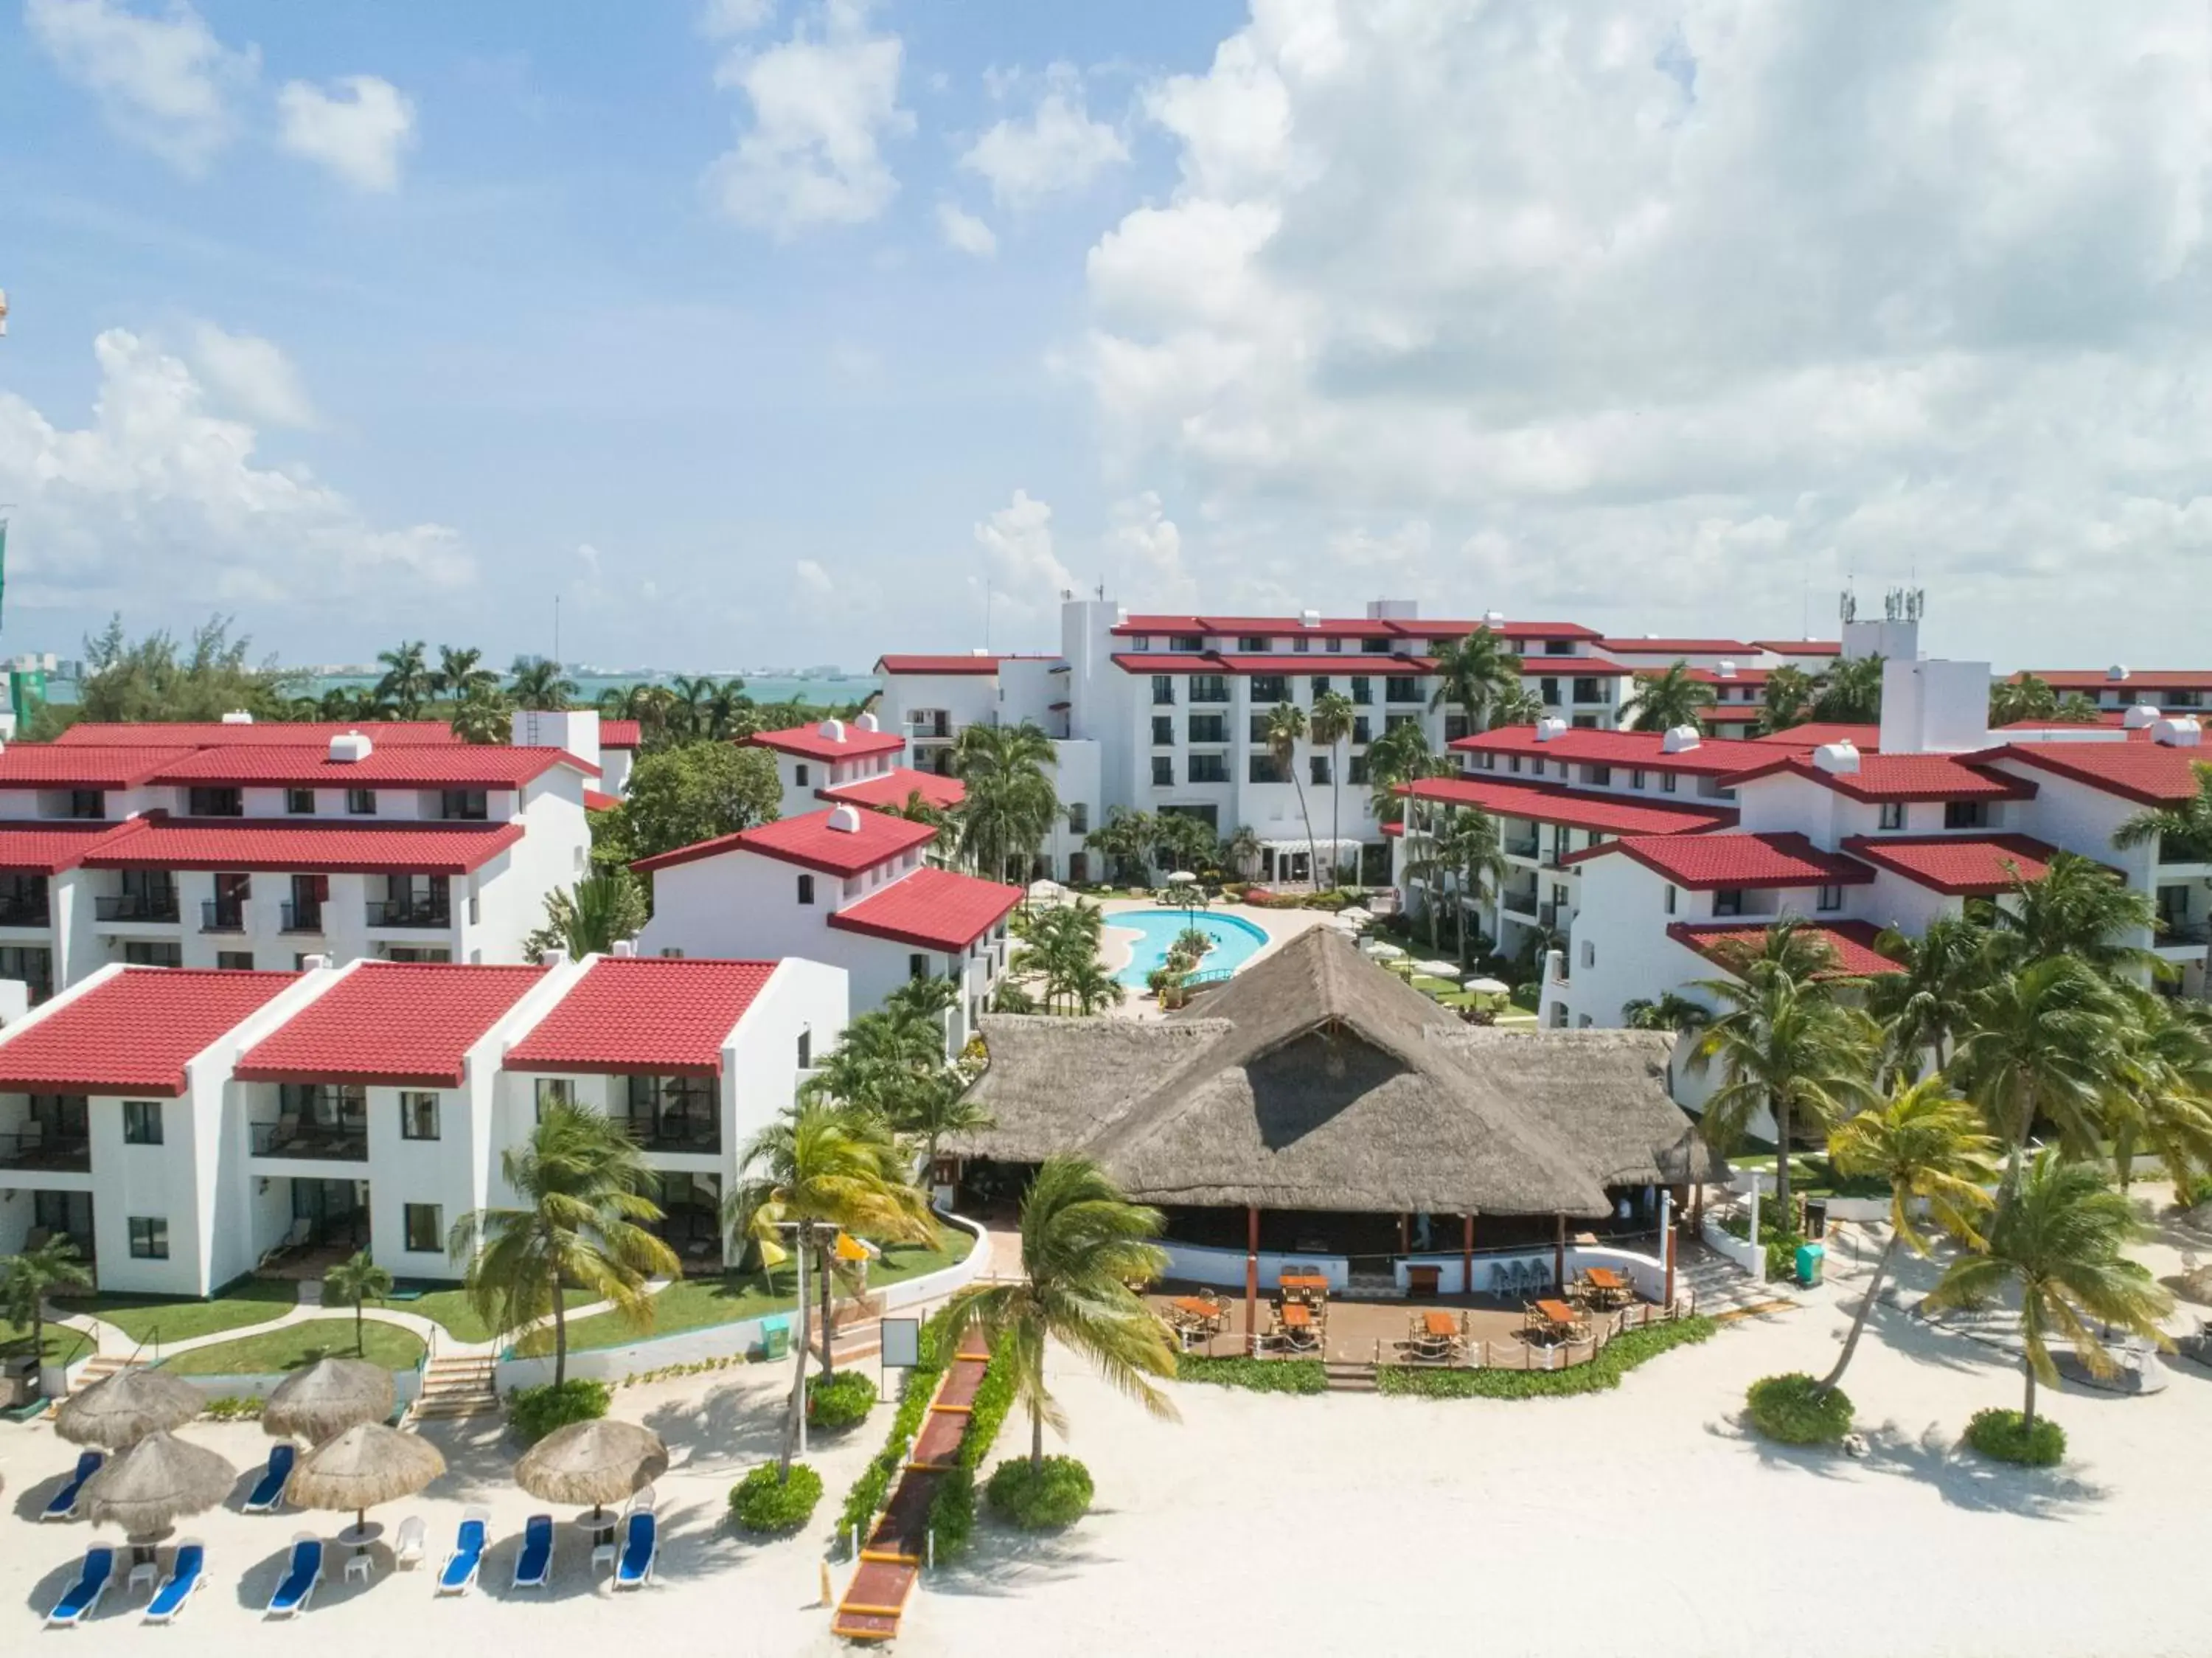 Property building, Bird's-eye View in The Villas at The Royal Cancun - All Suites Resort